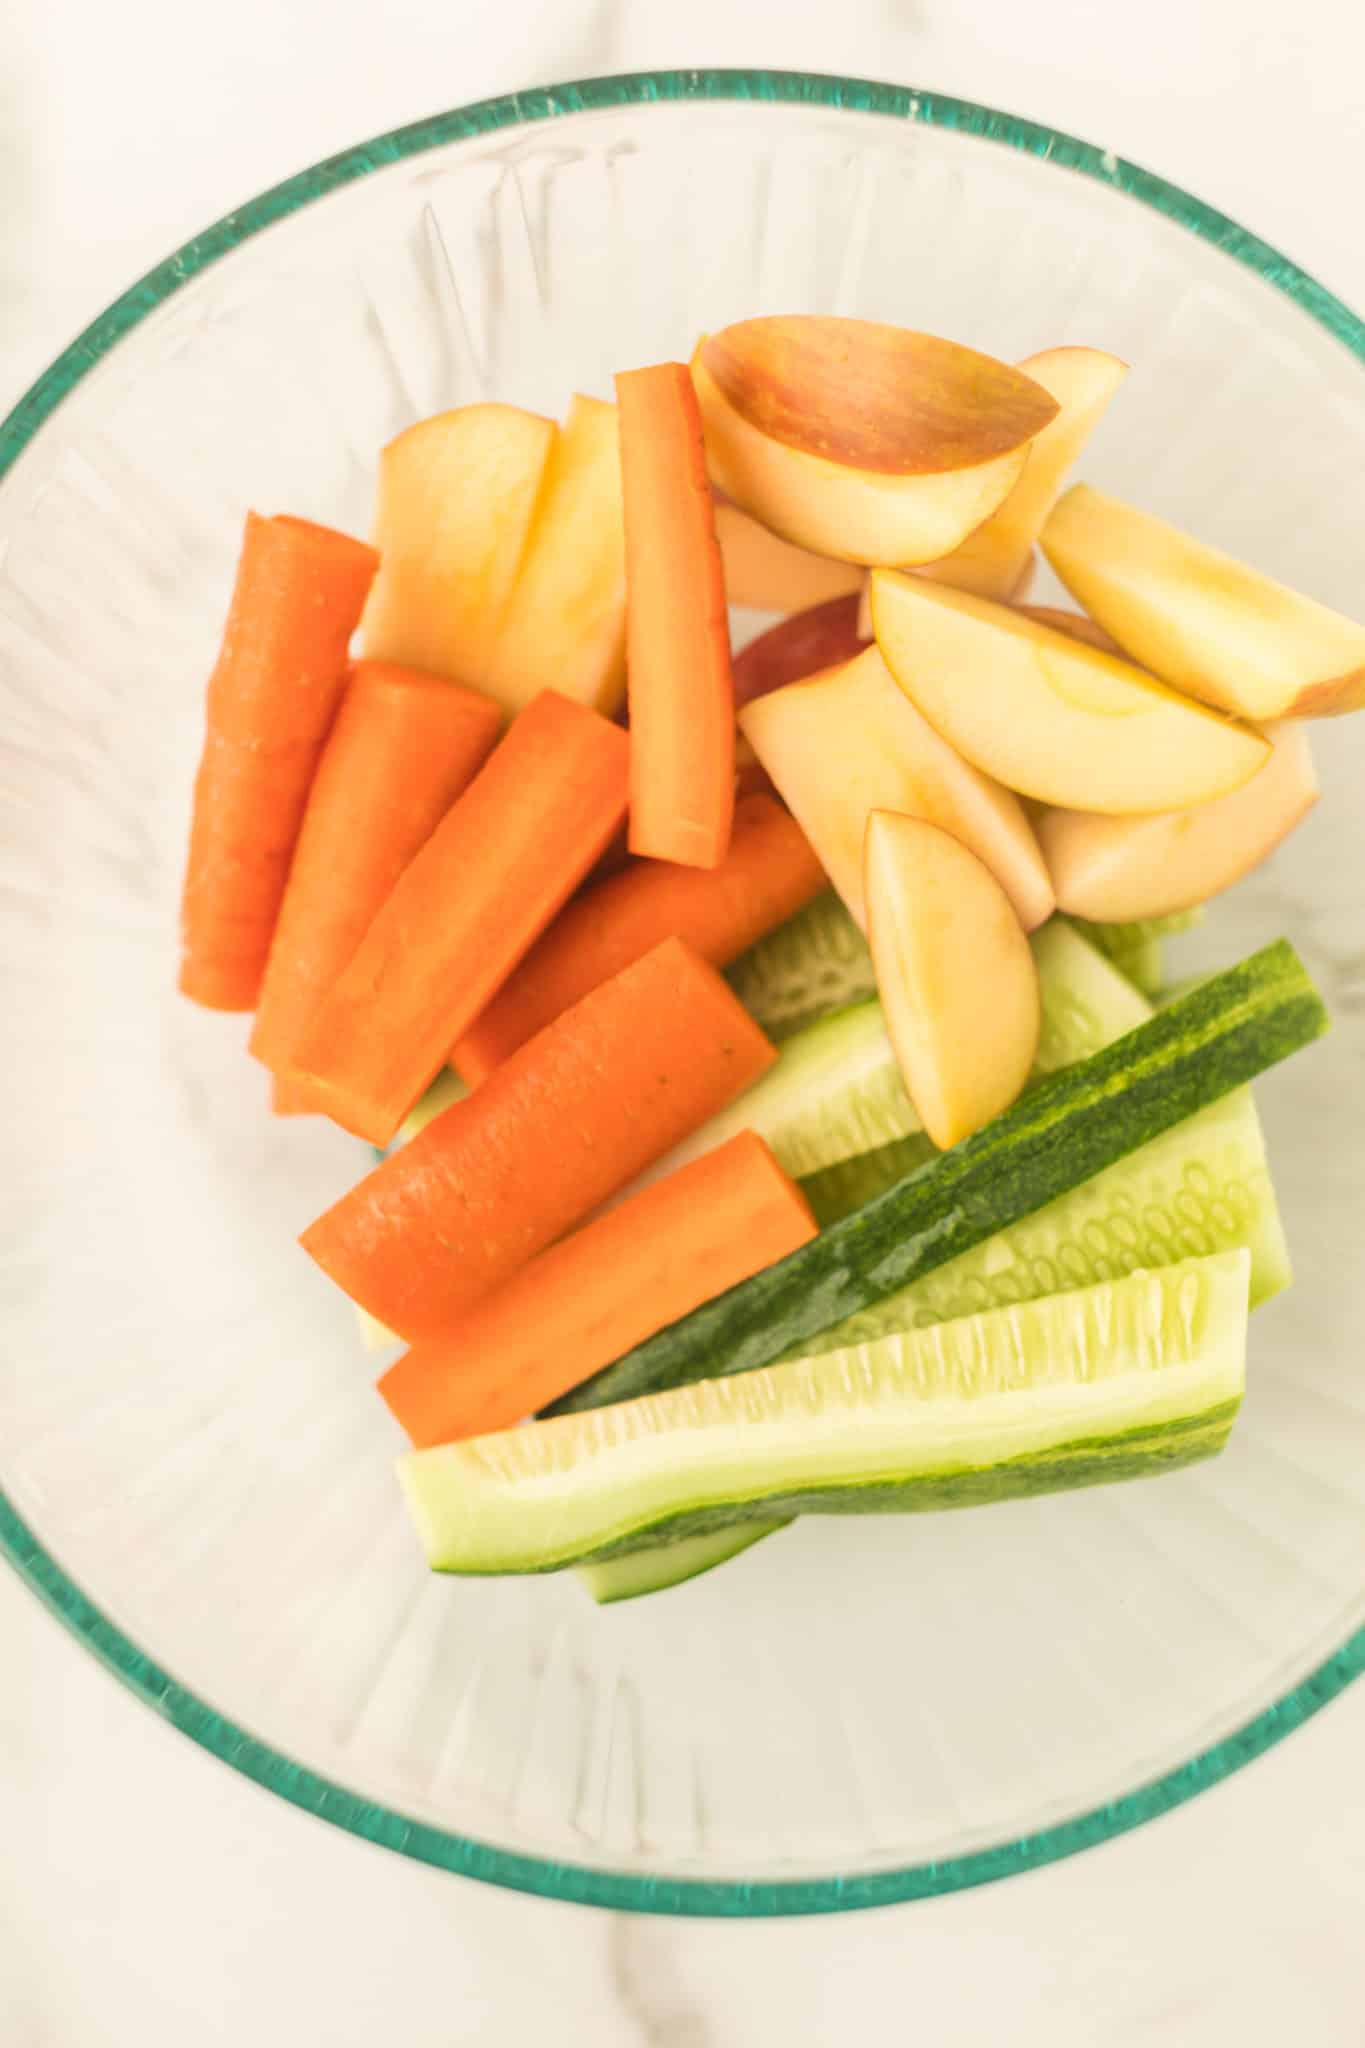 cut up apples, carrots, and cucumber in a bowl.